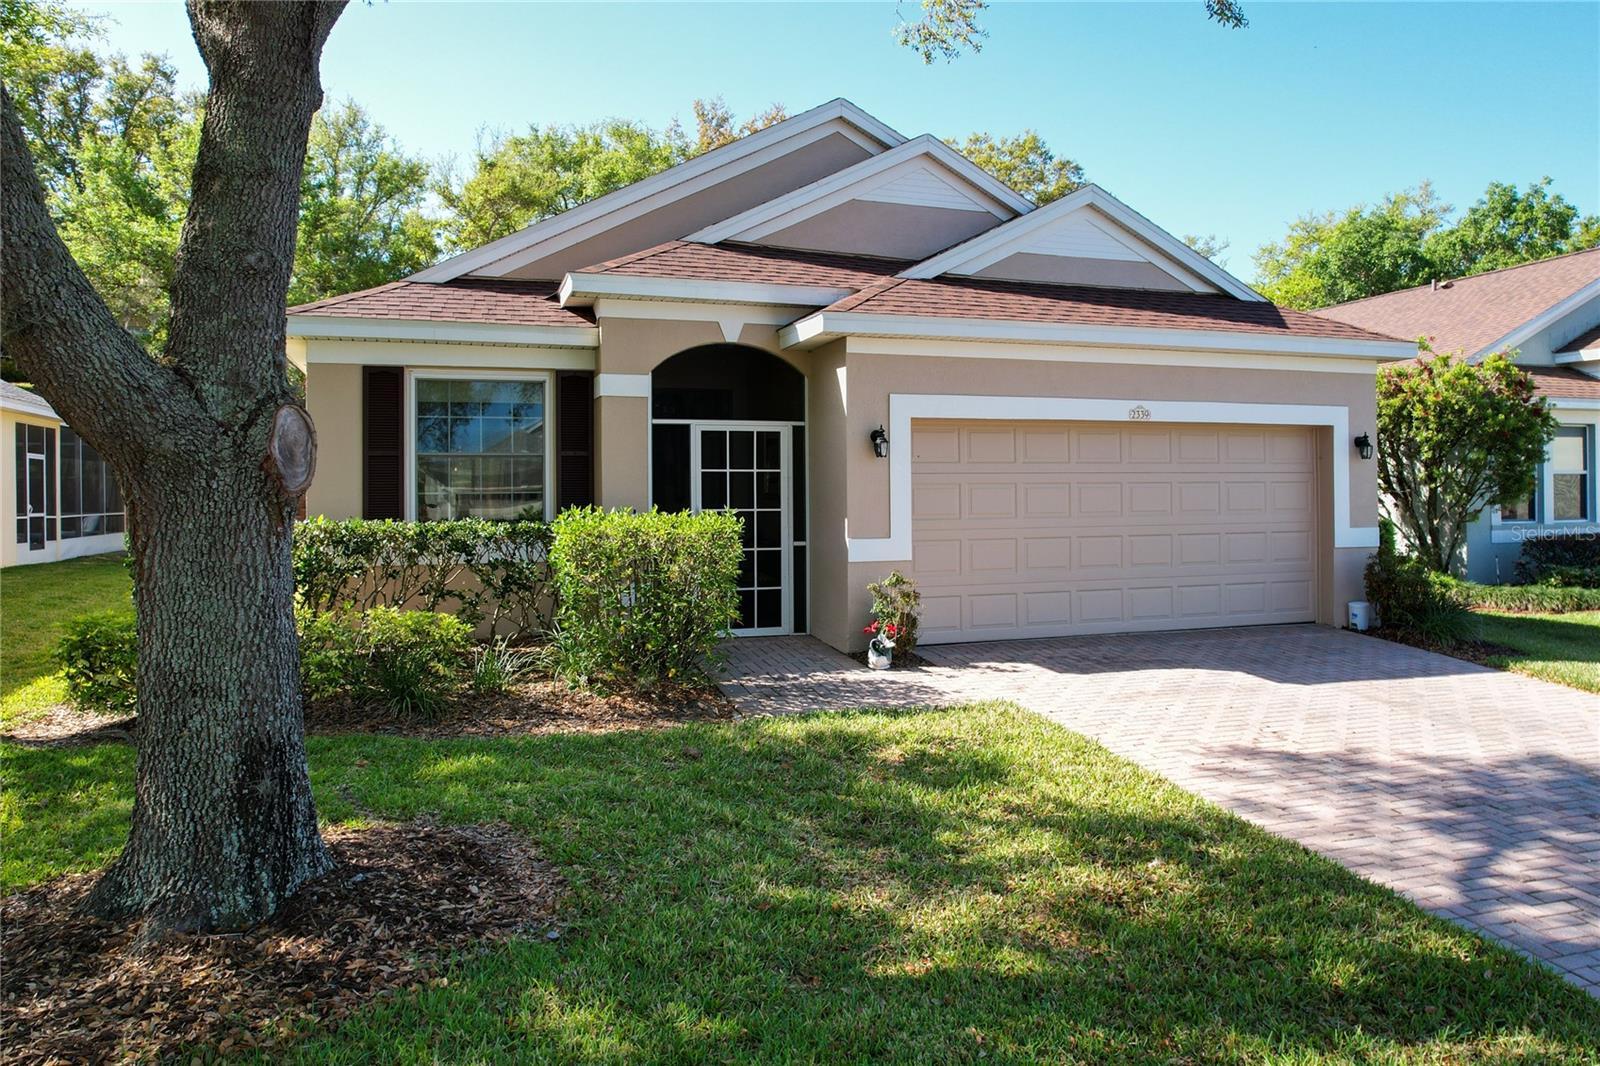 Photo one of 2339 Caledonian St Clermont FL 34711 | MLS O6187821